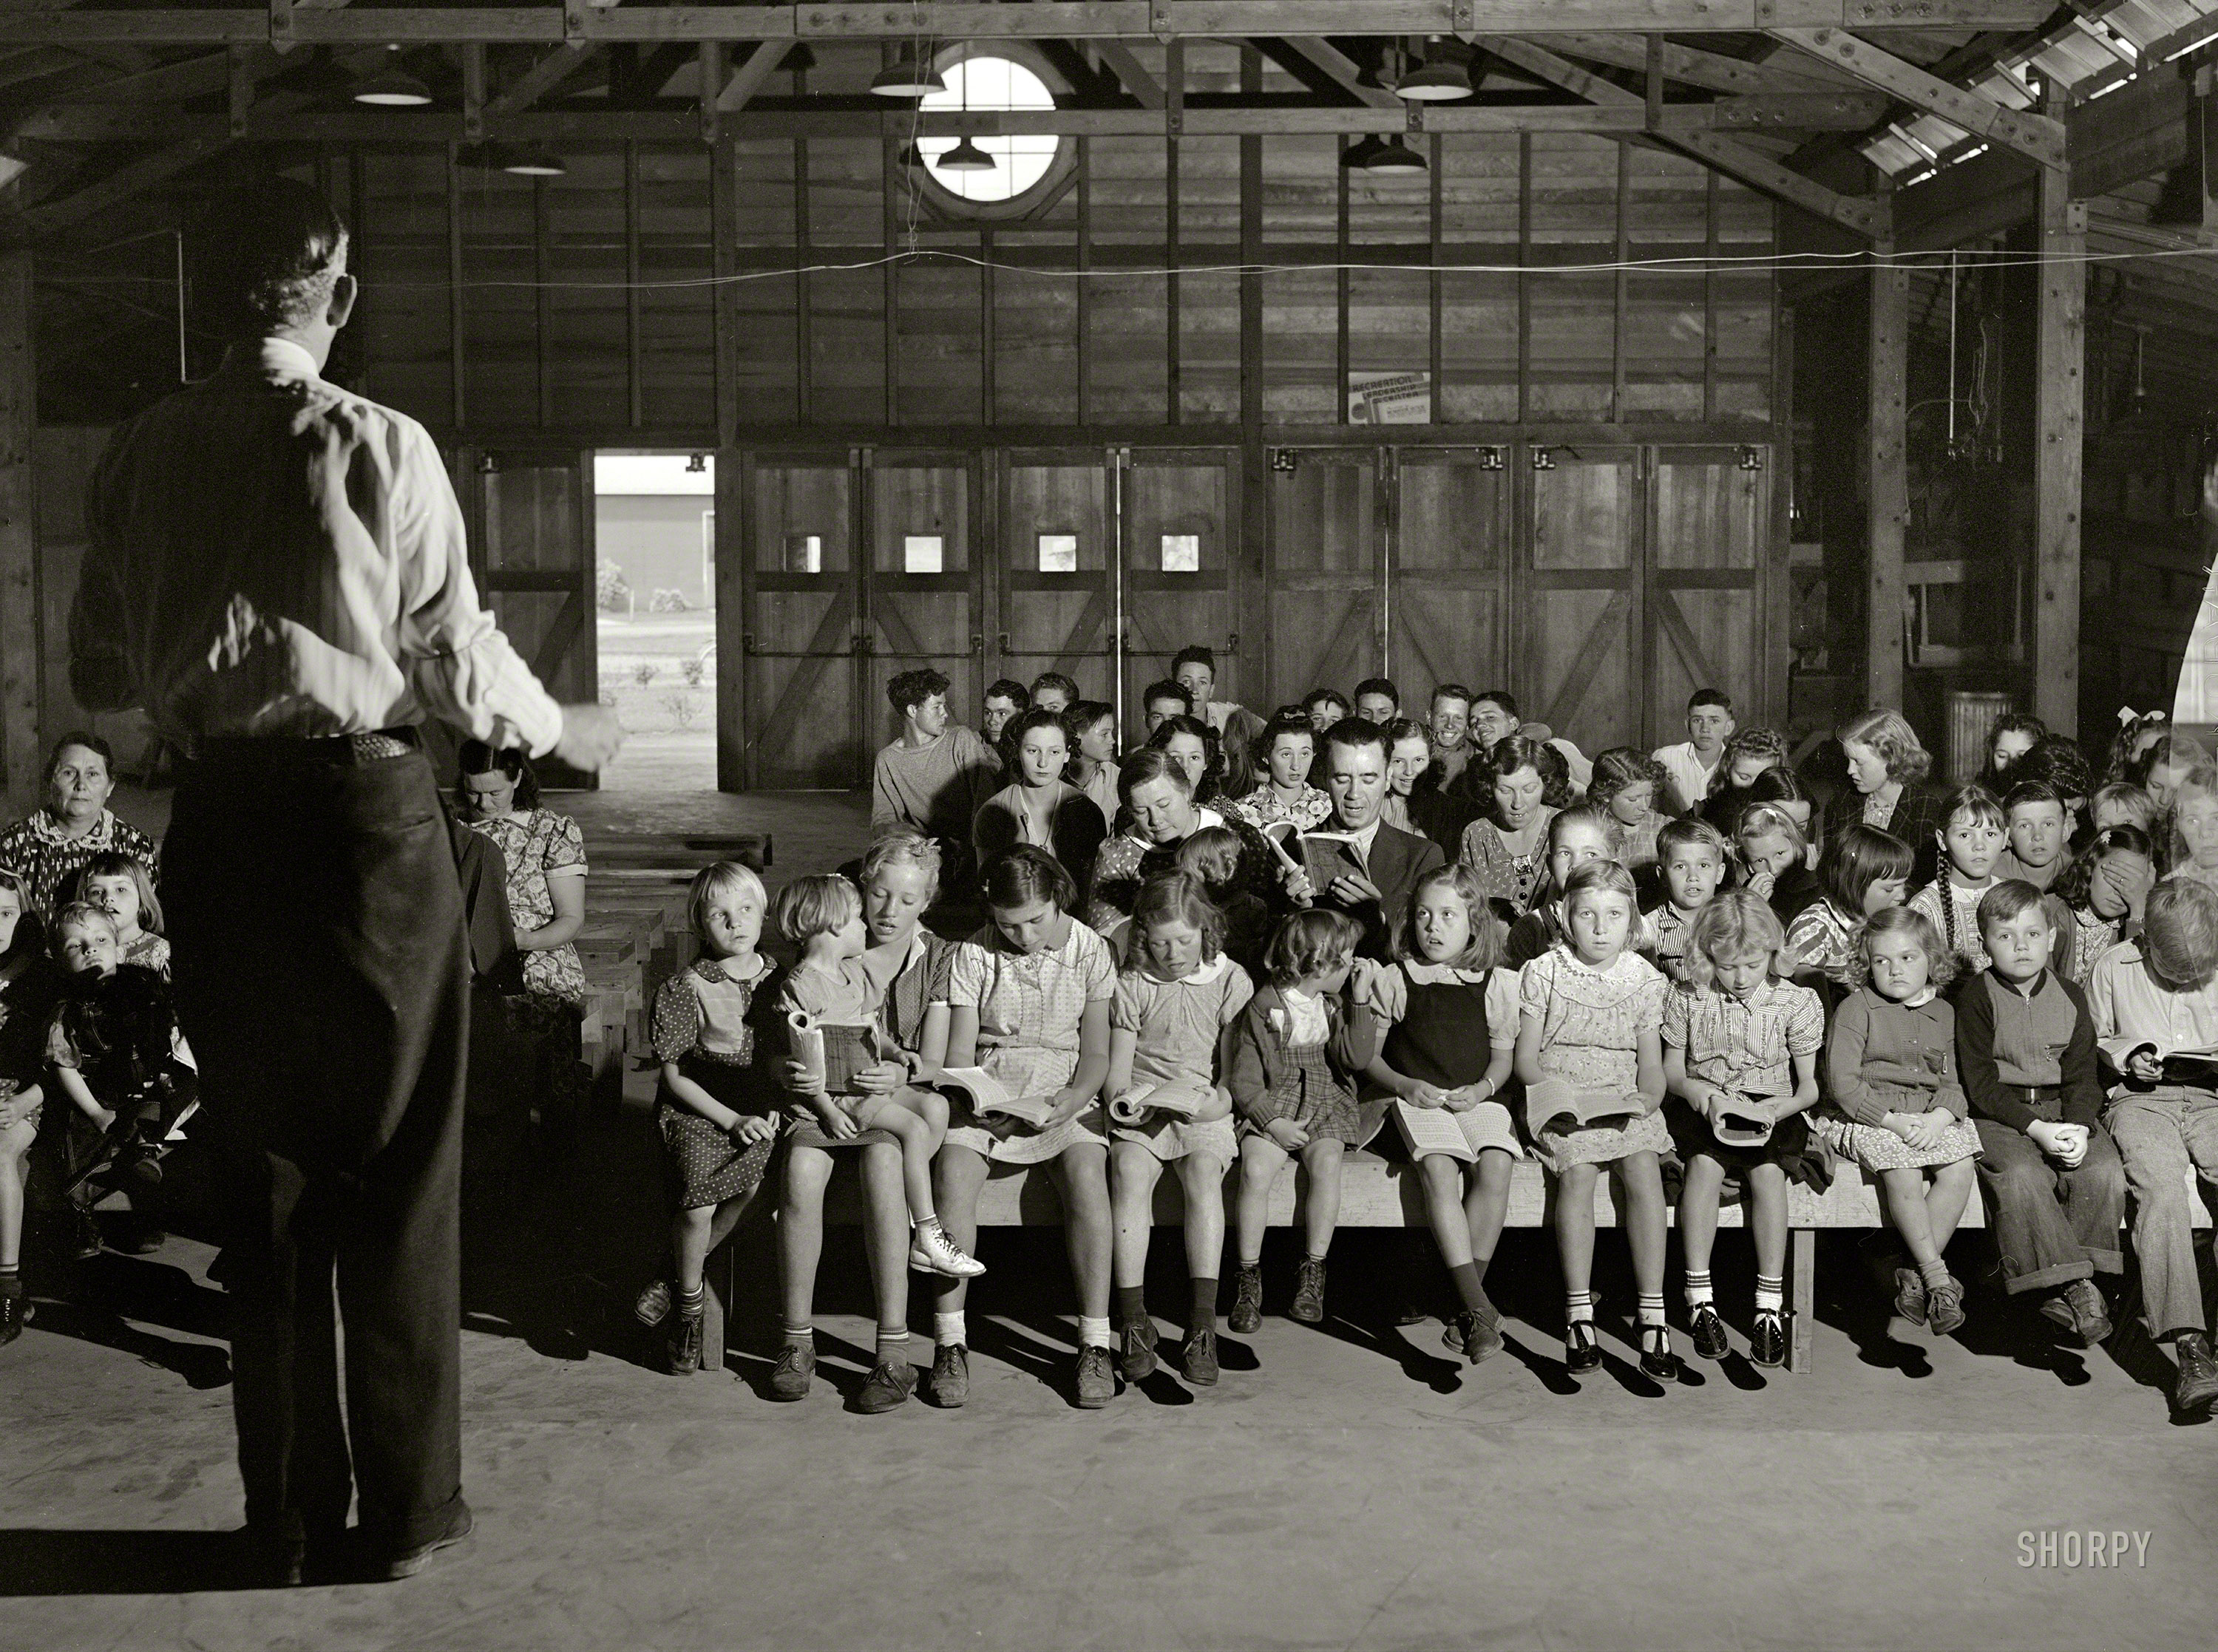 March 1940. Visalia, California. "Tulare migrant camp. Sunday school." Where the angels get to sit up front. Photo by Arthur Rothstein. View full size.